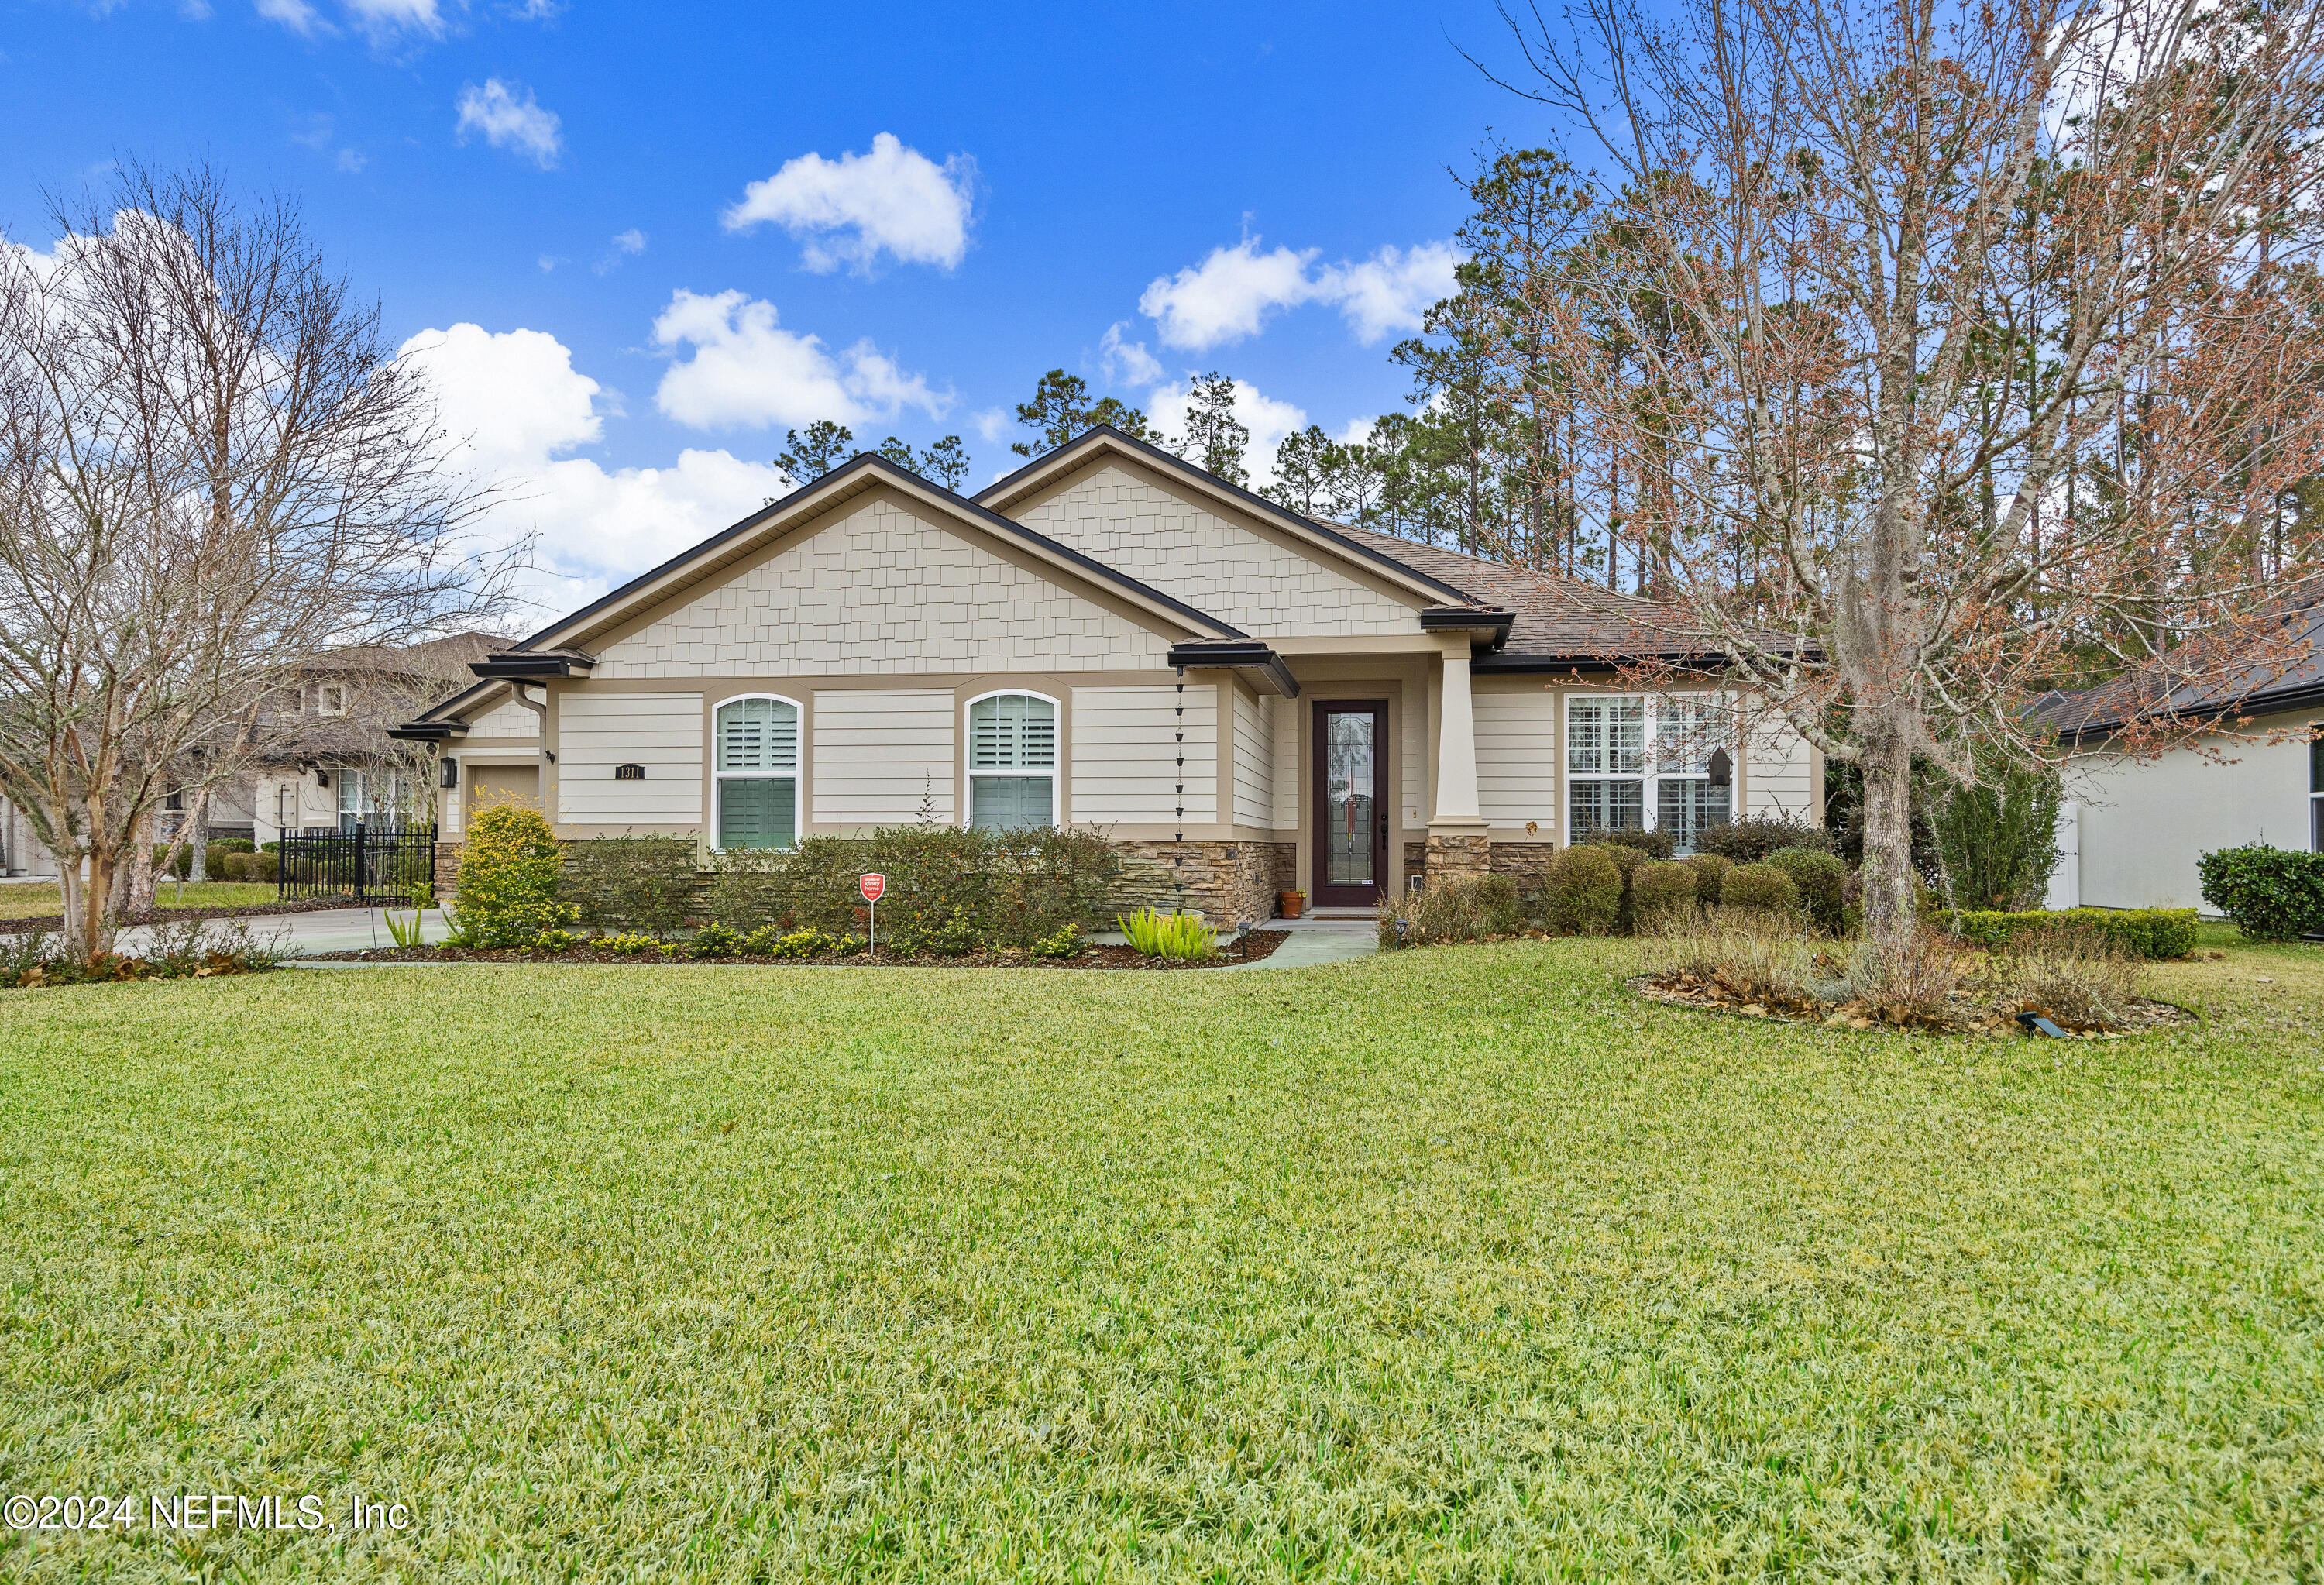 Middleburg, FL home for sale located at 1311 Coopers Hawk Way, Middleburg, FL 32068